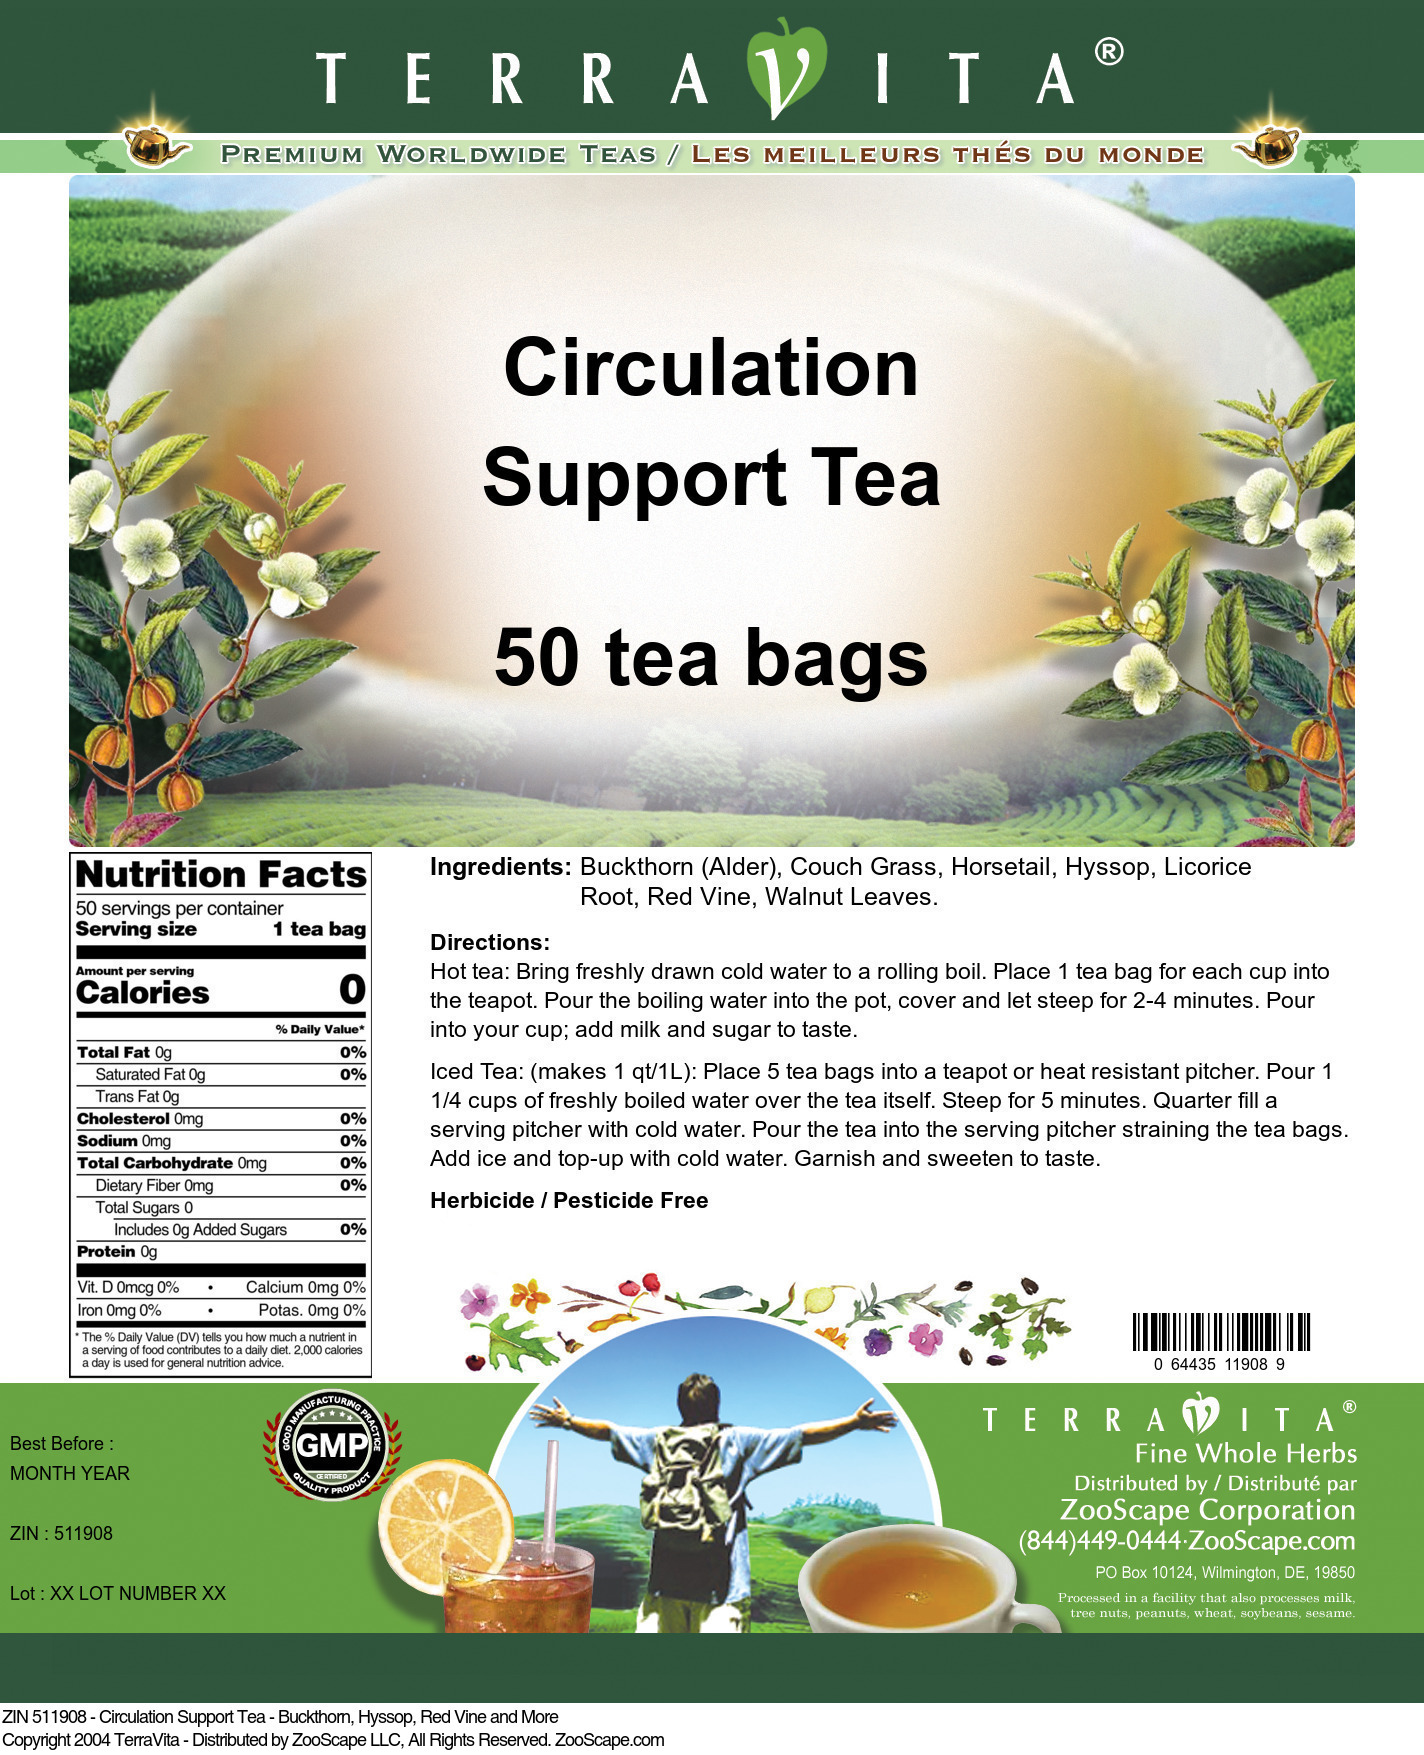 Circulation Support Tea - Buckthorn, Hyssop, Red Vine and More - Label